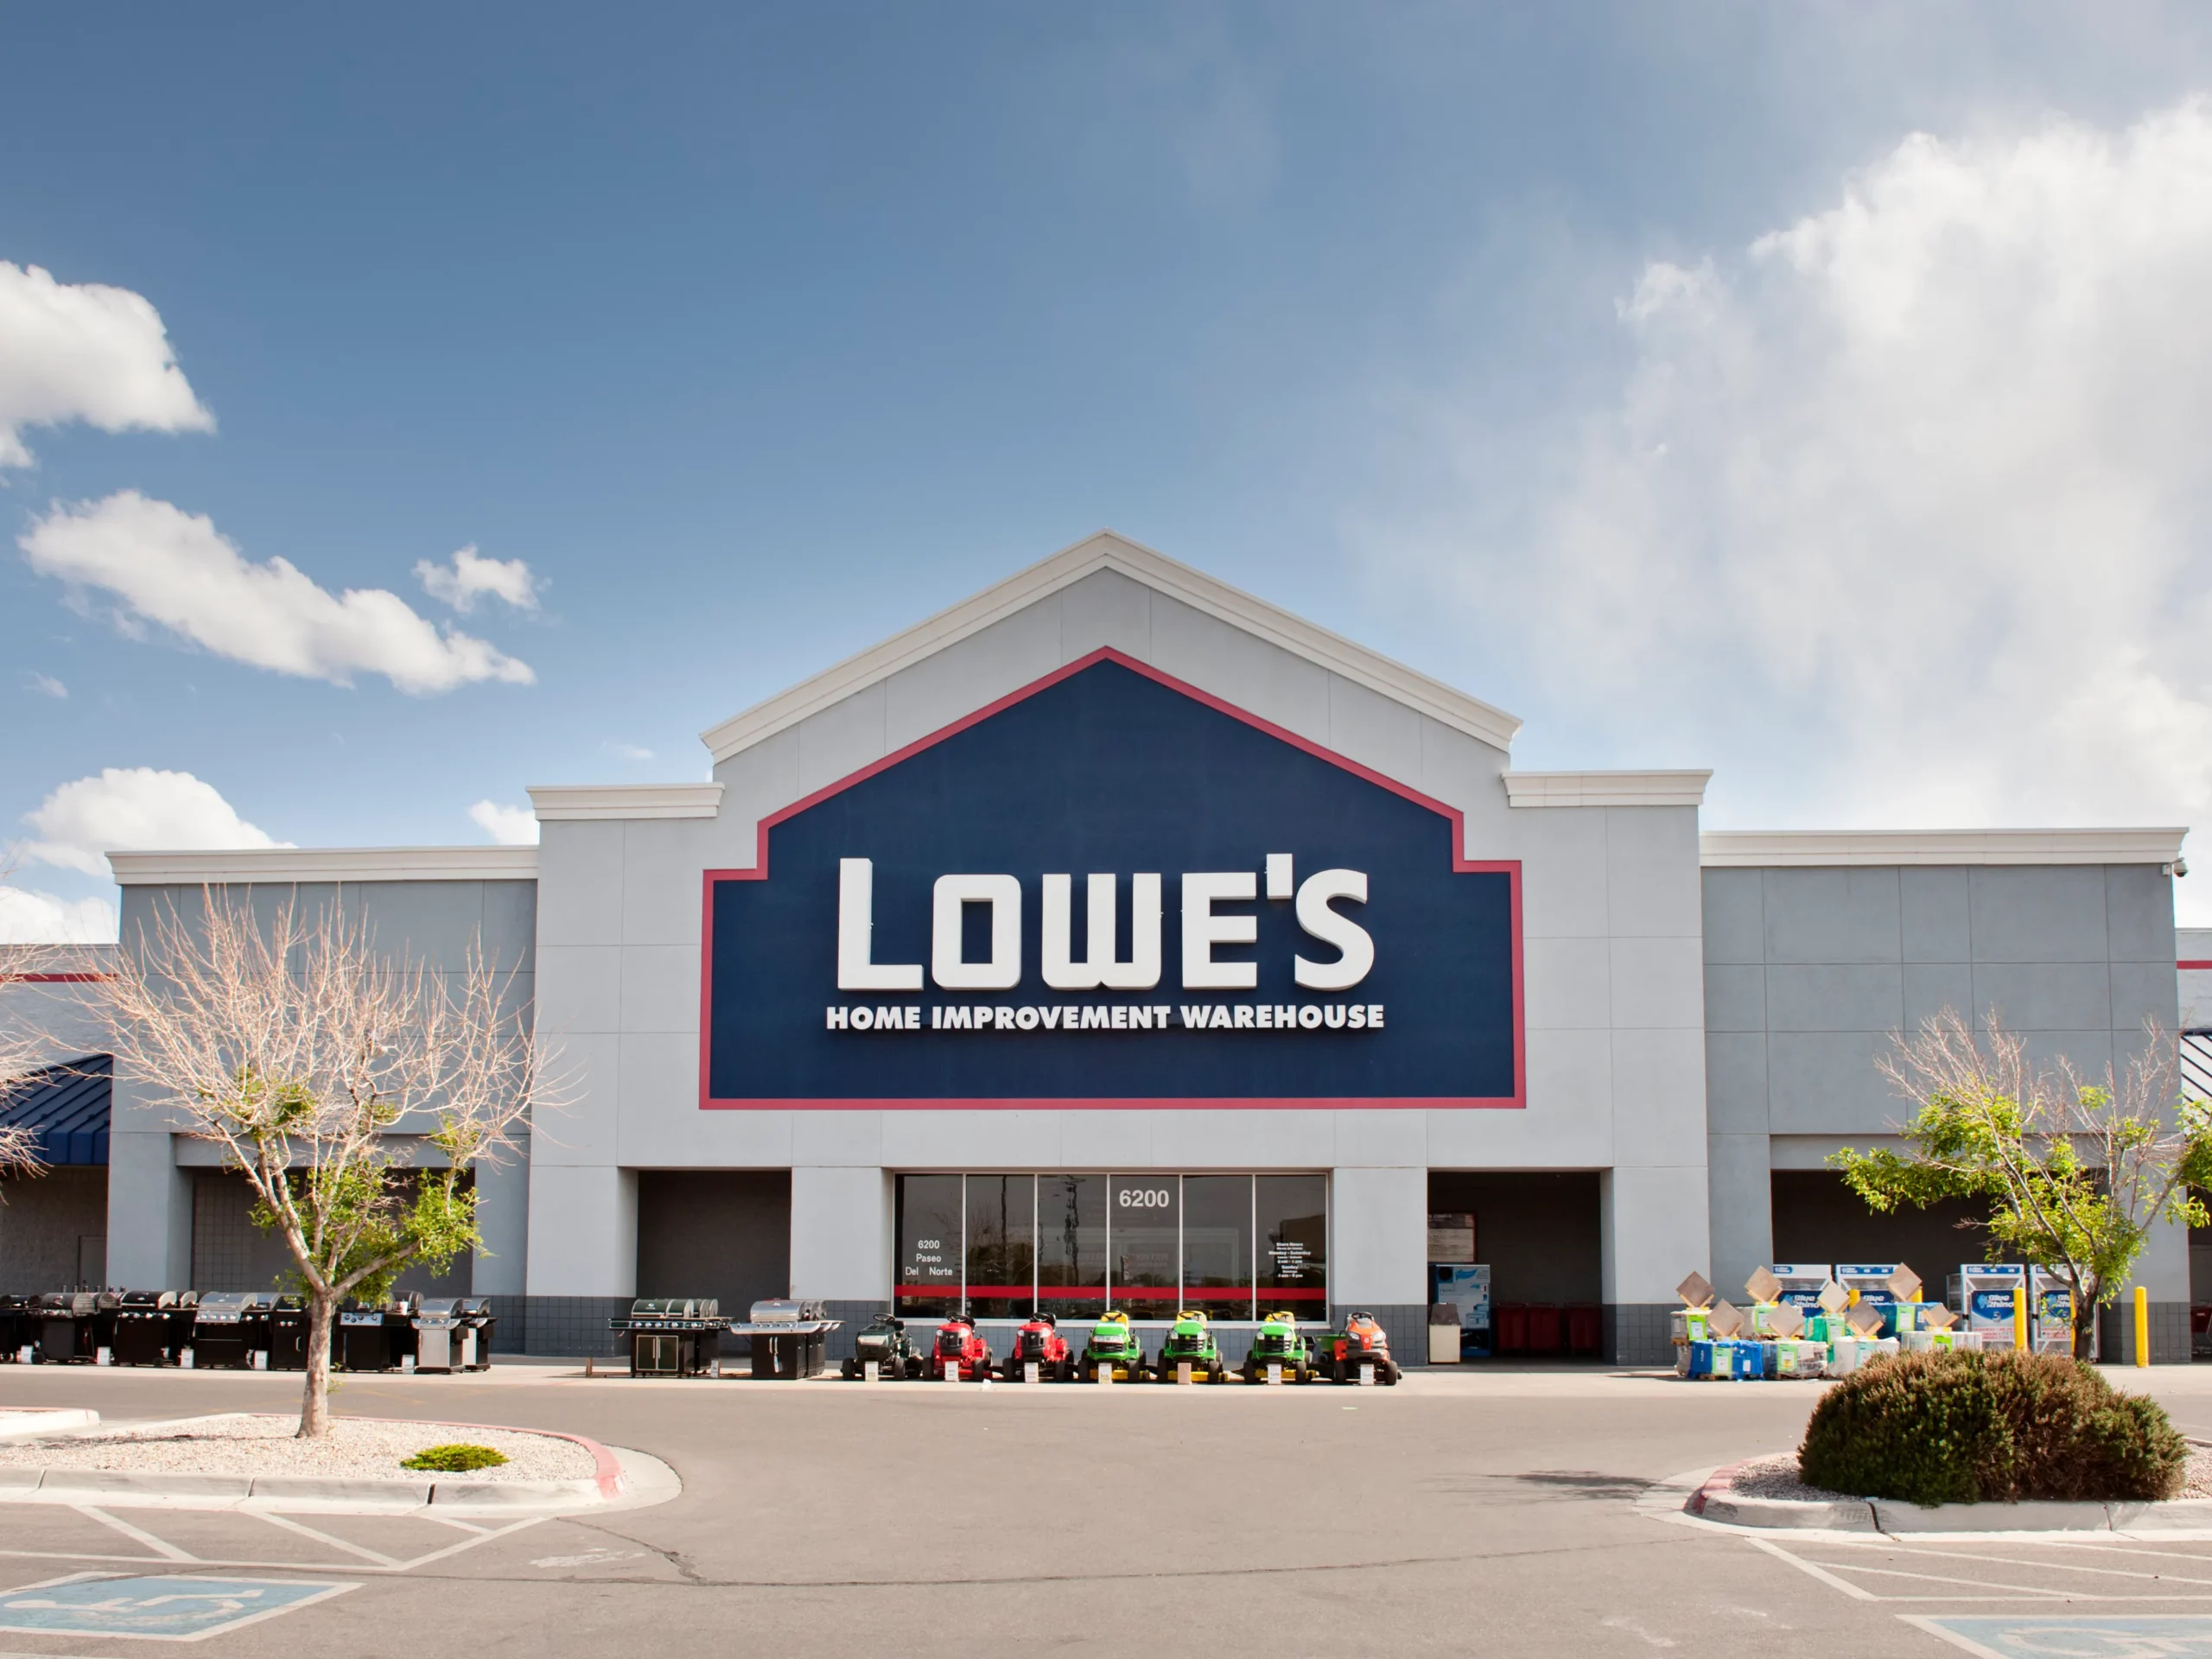 Home Depot or Lowes